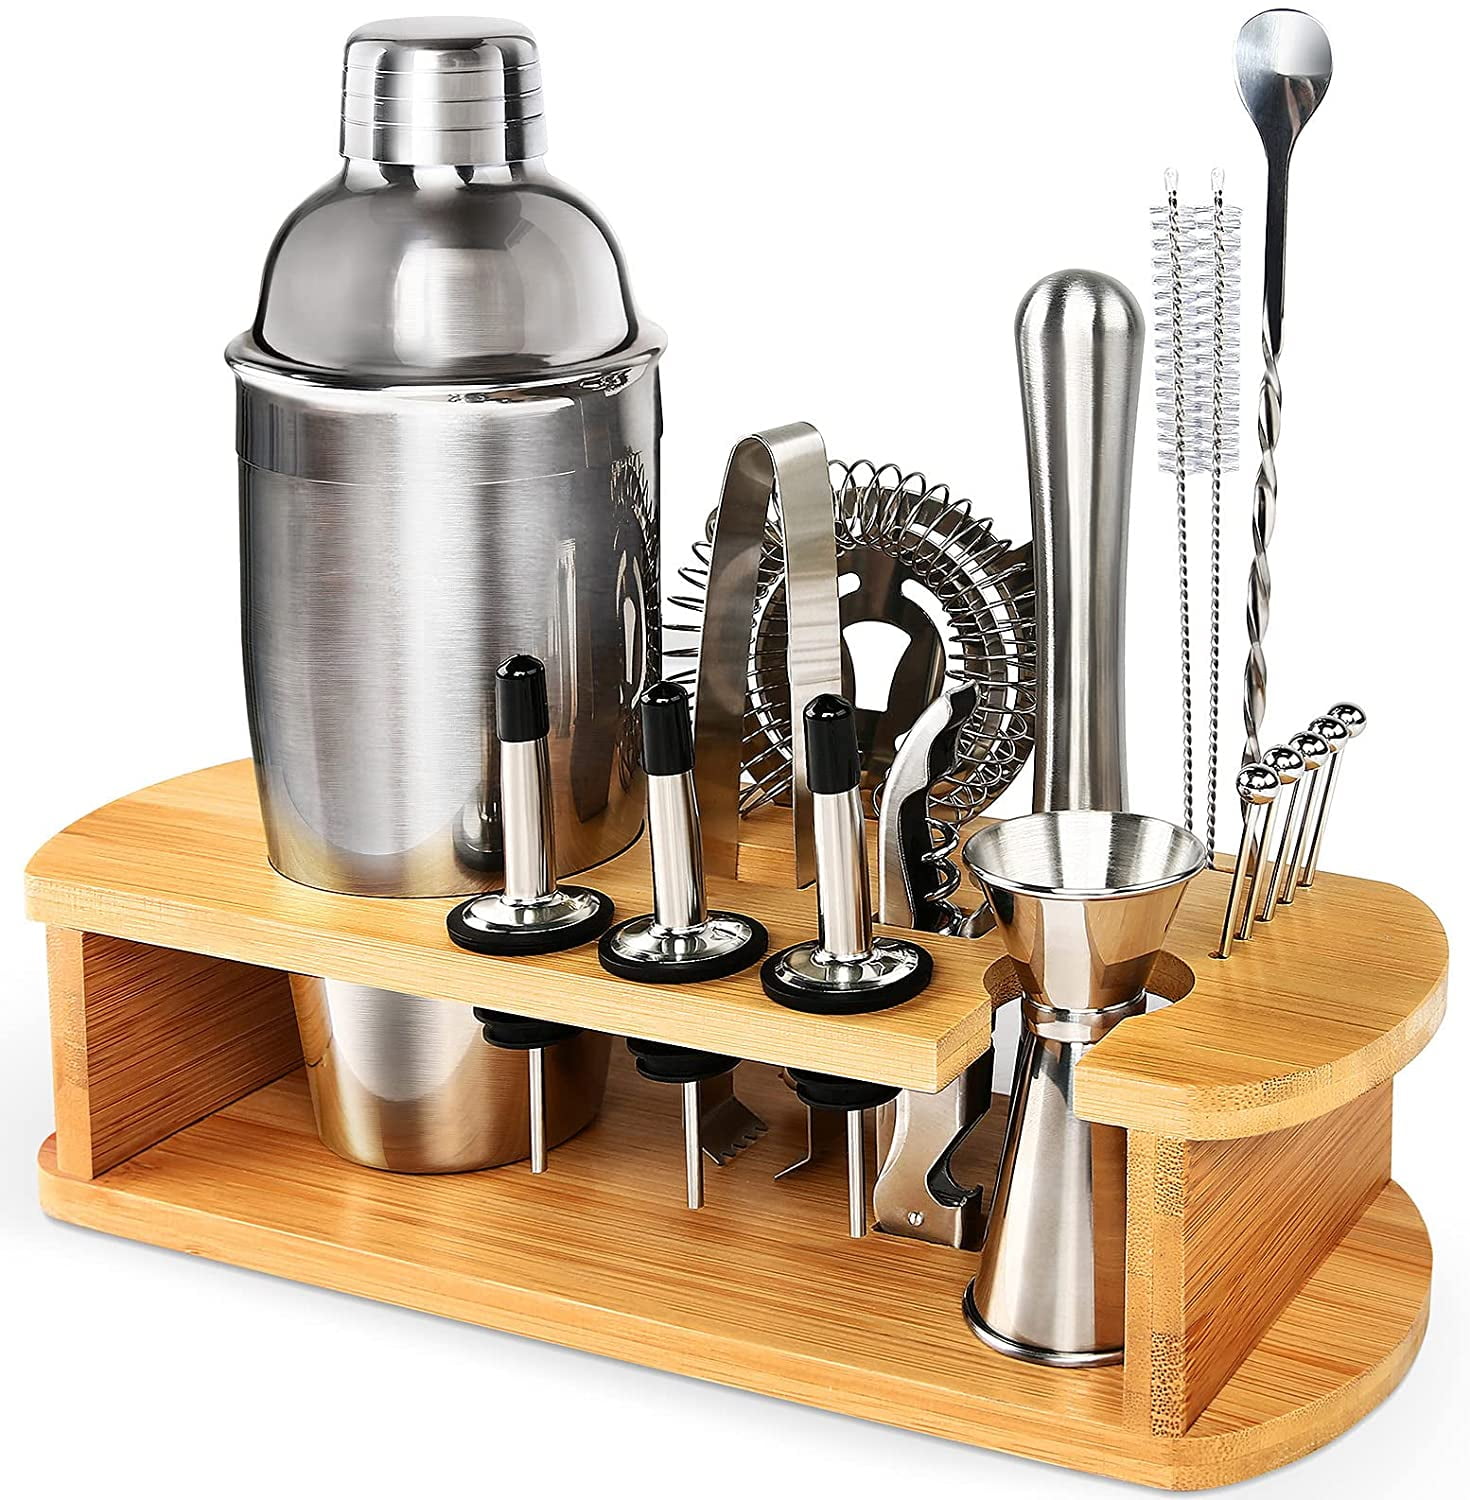 Cocktail Shaker Set with All Accessories, Bar Tool Bartender Kit with 24 oz  Stainless Steel Martini Mixer, Bamboo Stand for Drink  Mixing,Home,Bar,Party, 18pcs - Walmart.com